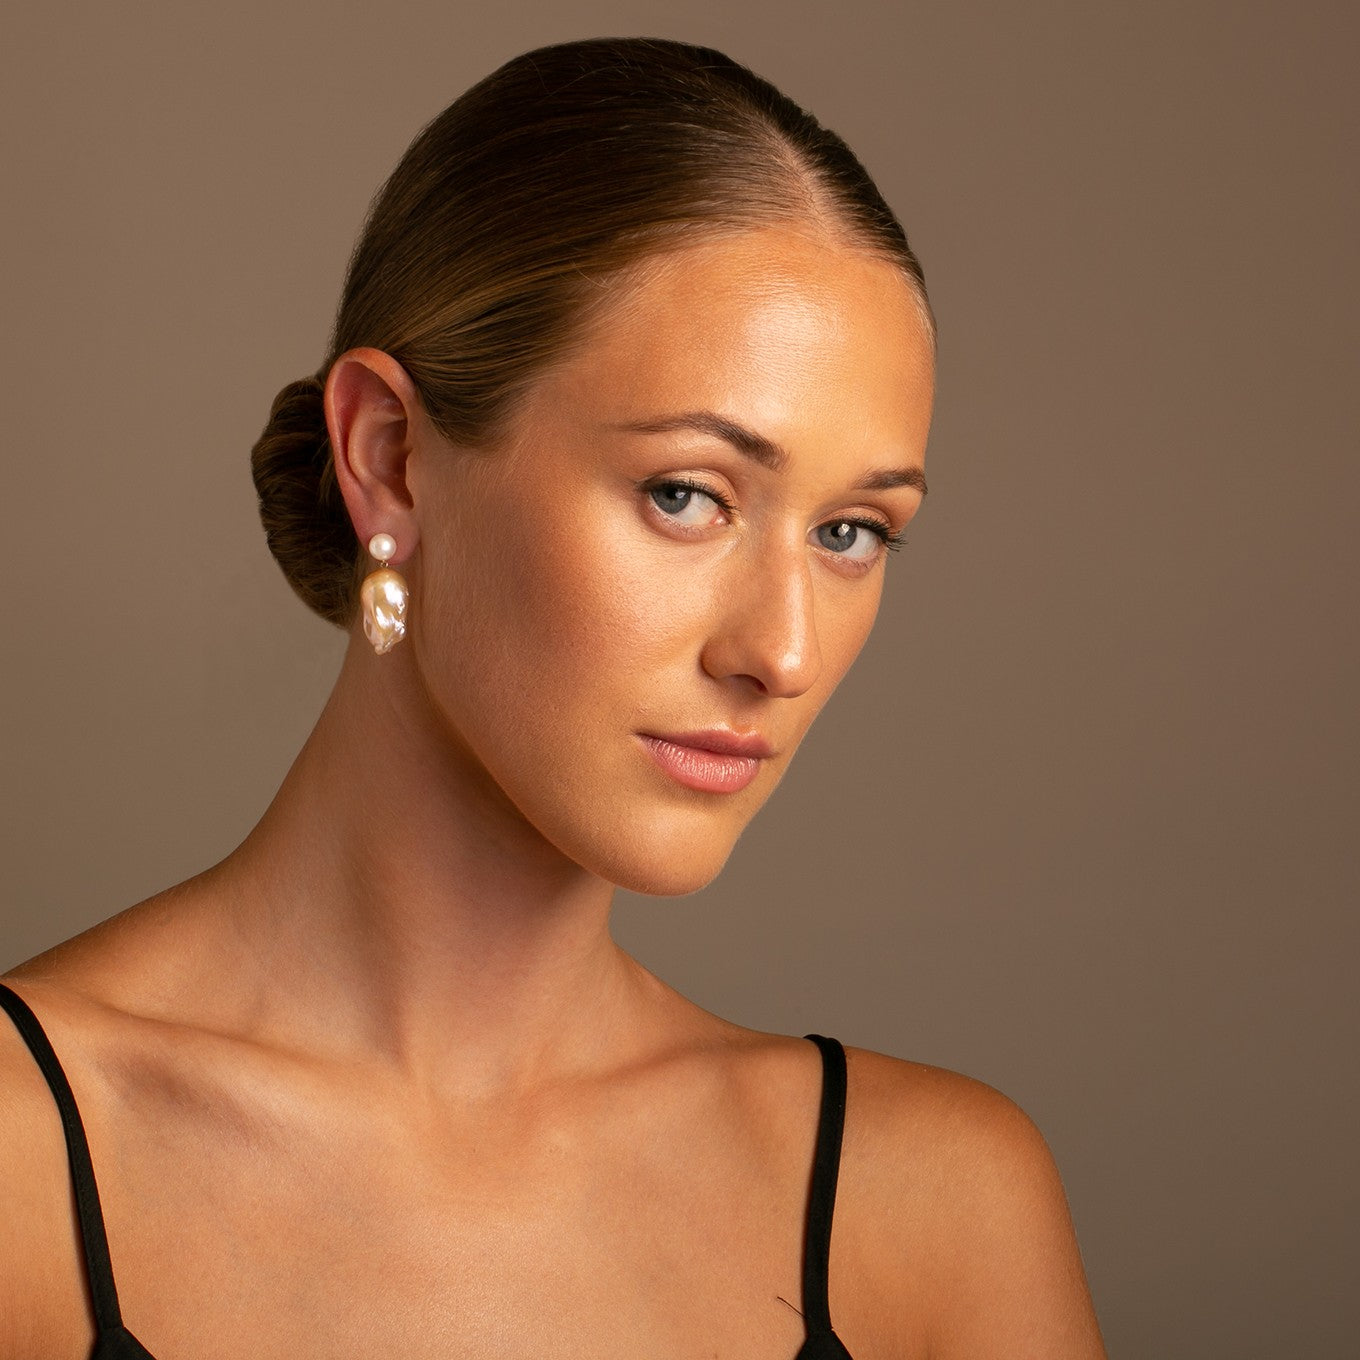 Double Bubble earrings pair a classic 8-8.5 mm white freshwater pearl with a distinctive golden baroque pearl on a 14k yellow gold post. These earrings make a sophisticated statement with their natural, lustrous dangle. Shown here on model